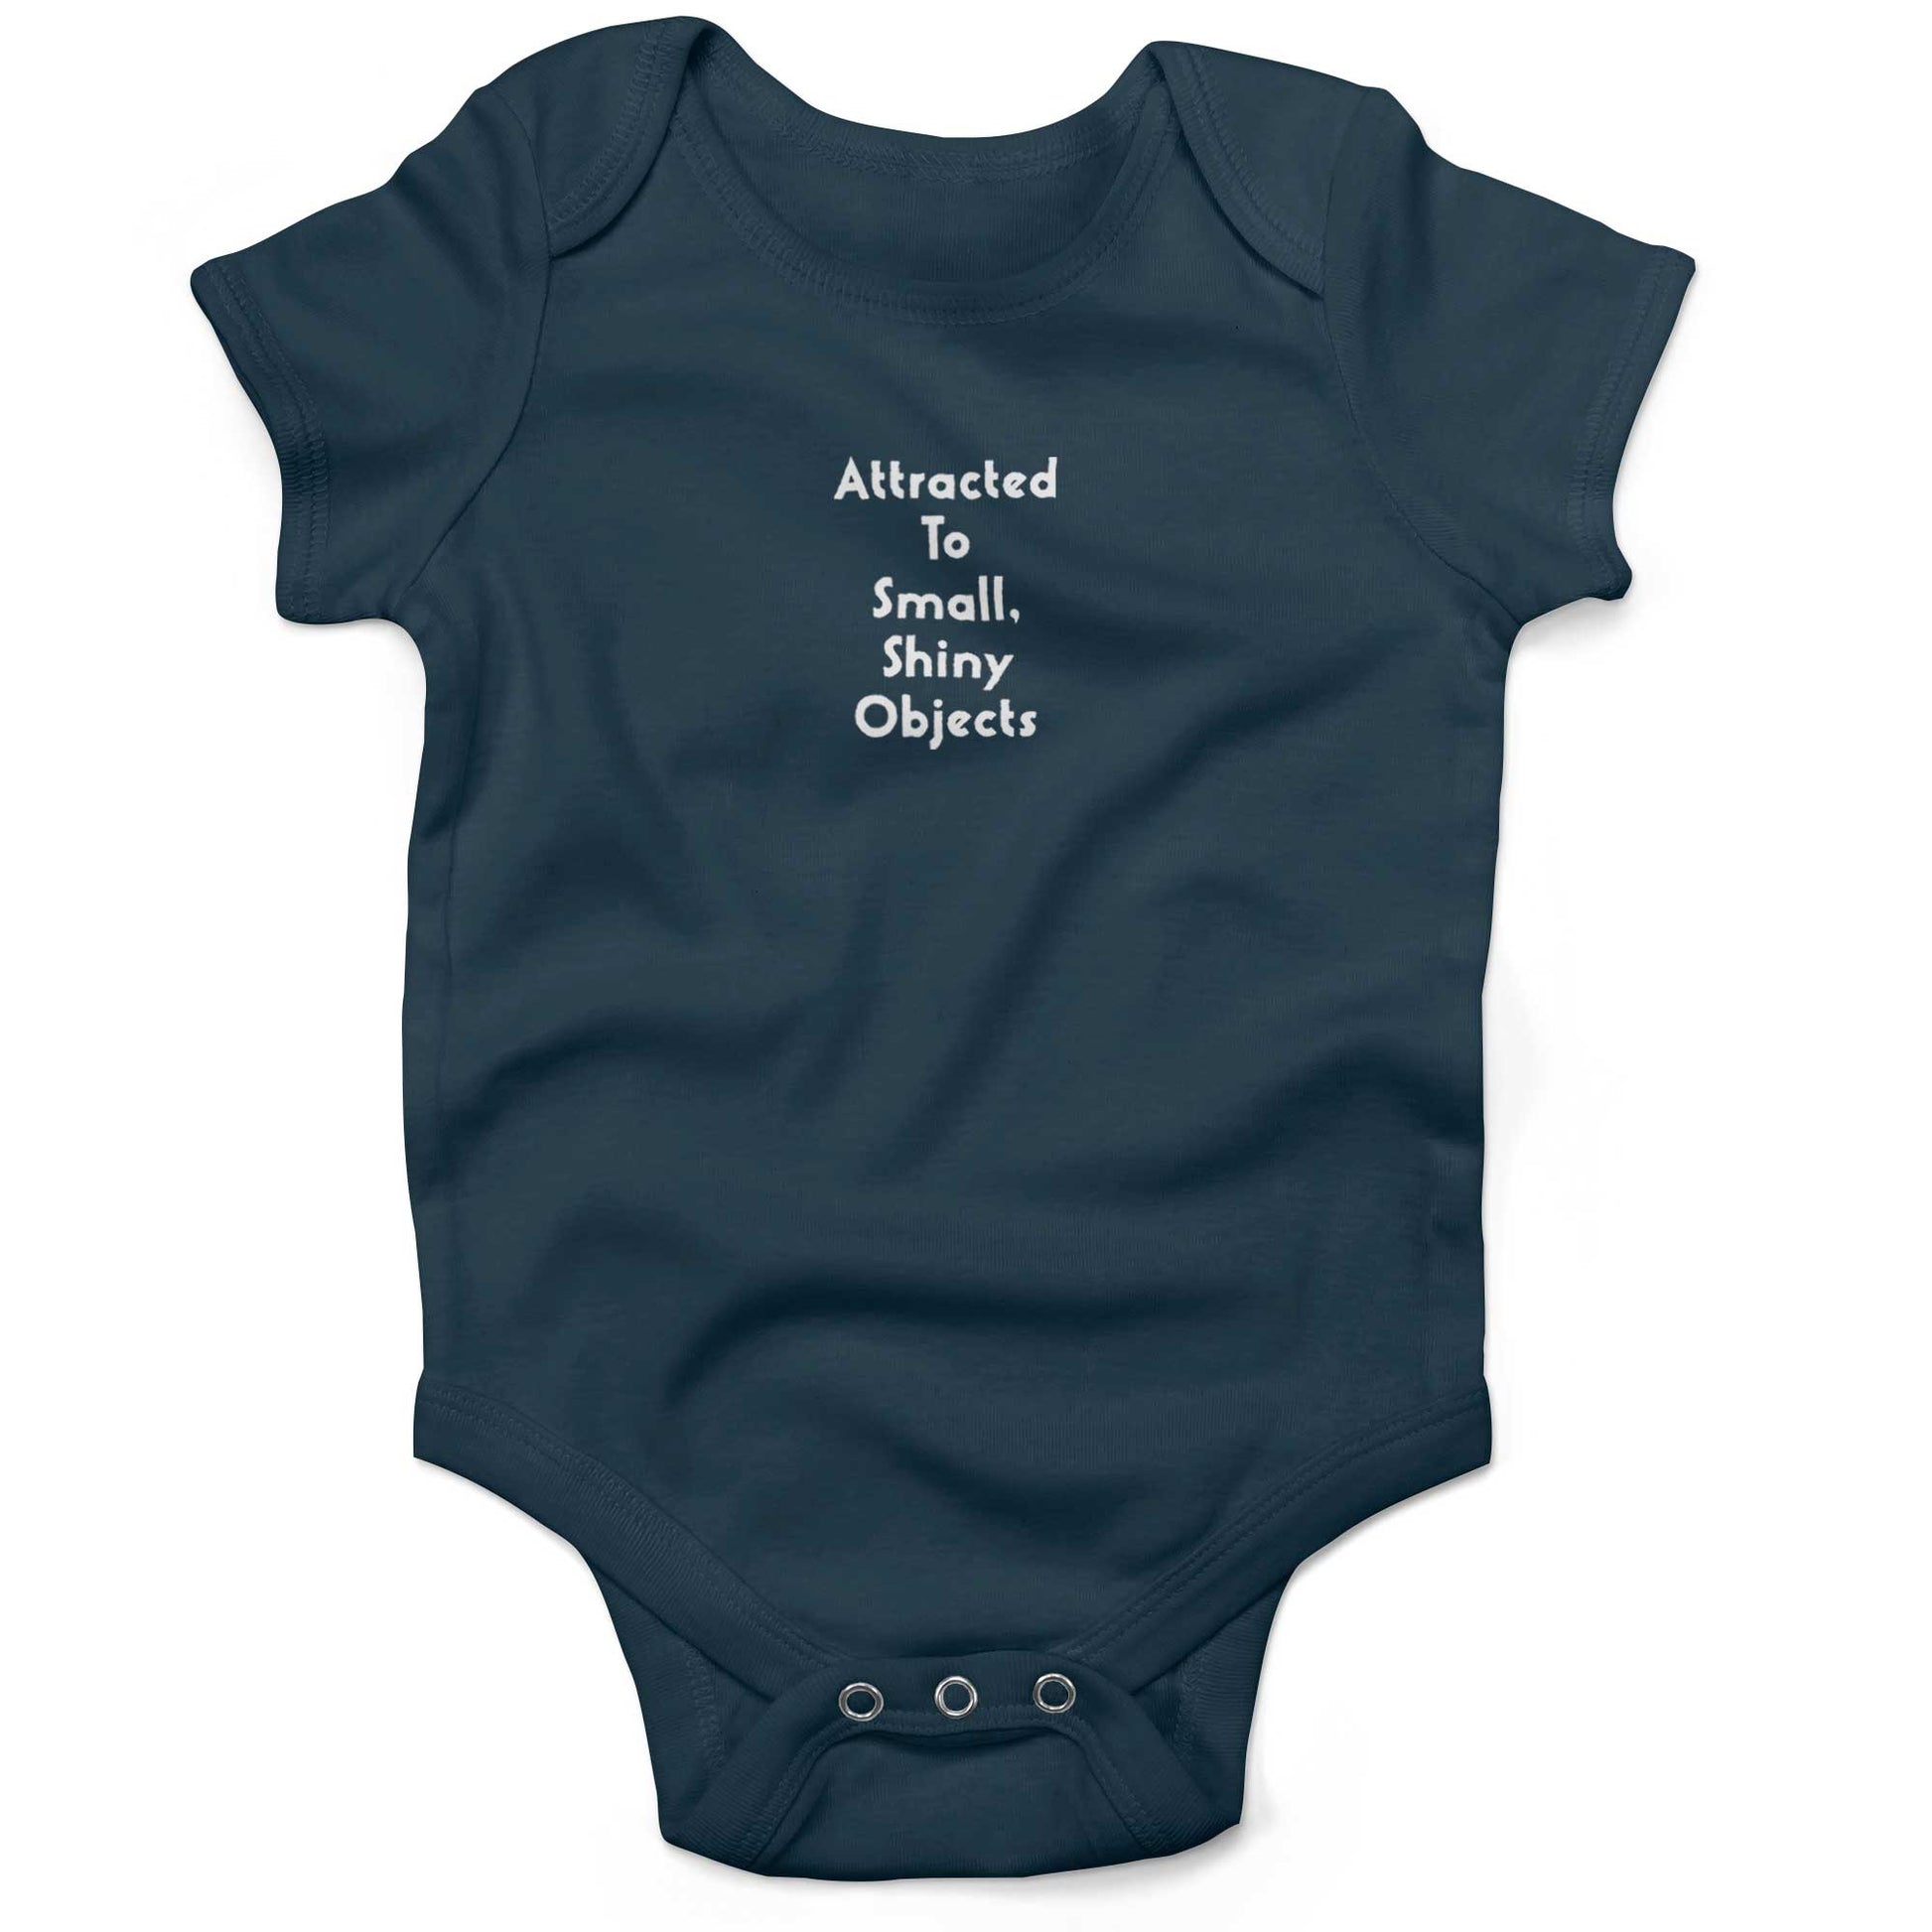 Attracted To Small, Shiny Objects Baby One Piece-Organic Pacific Blue-3-6 months